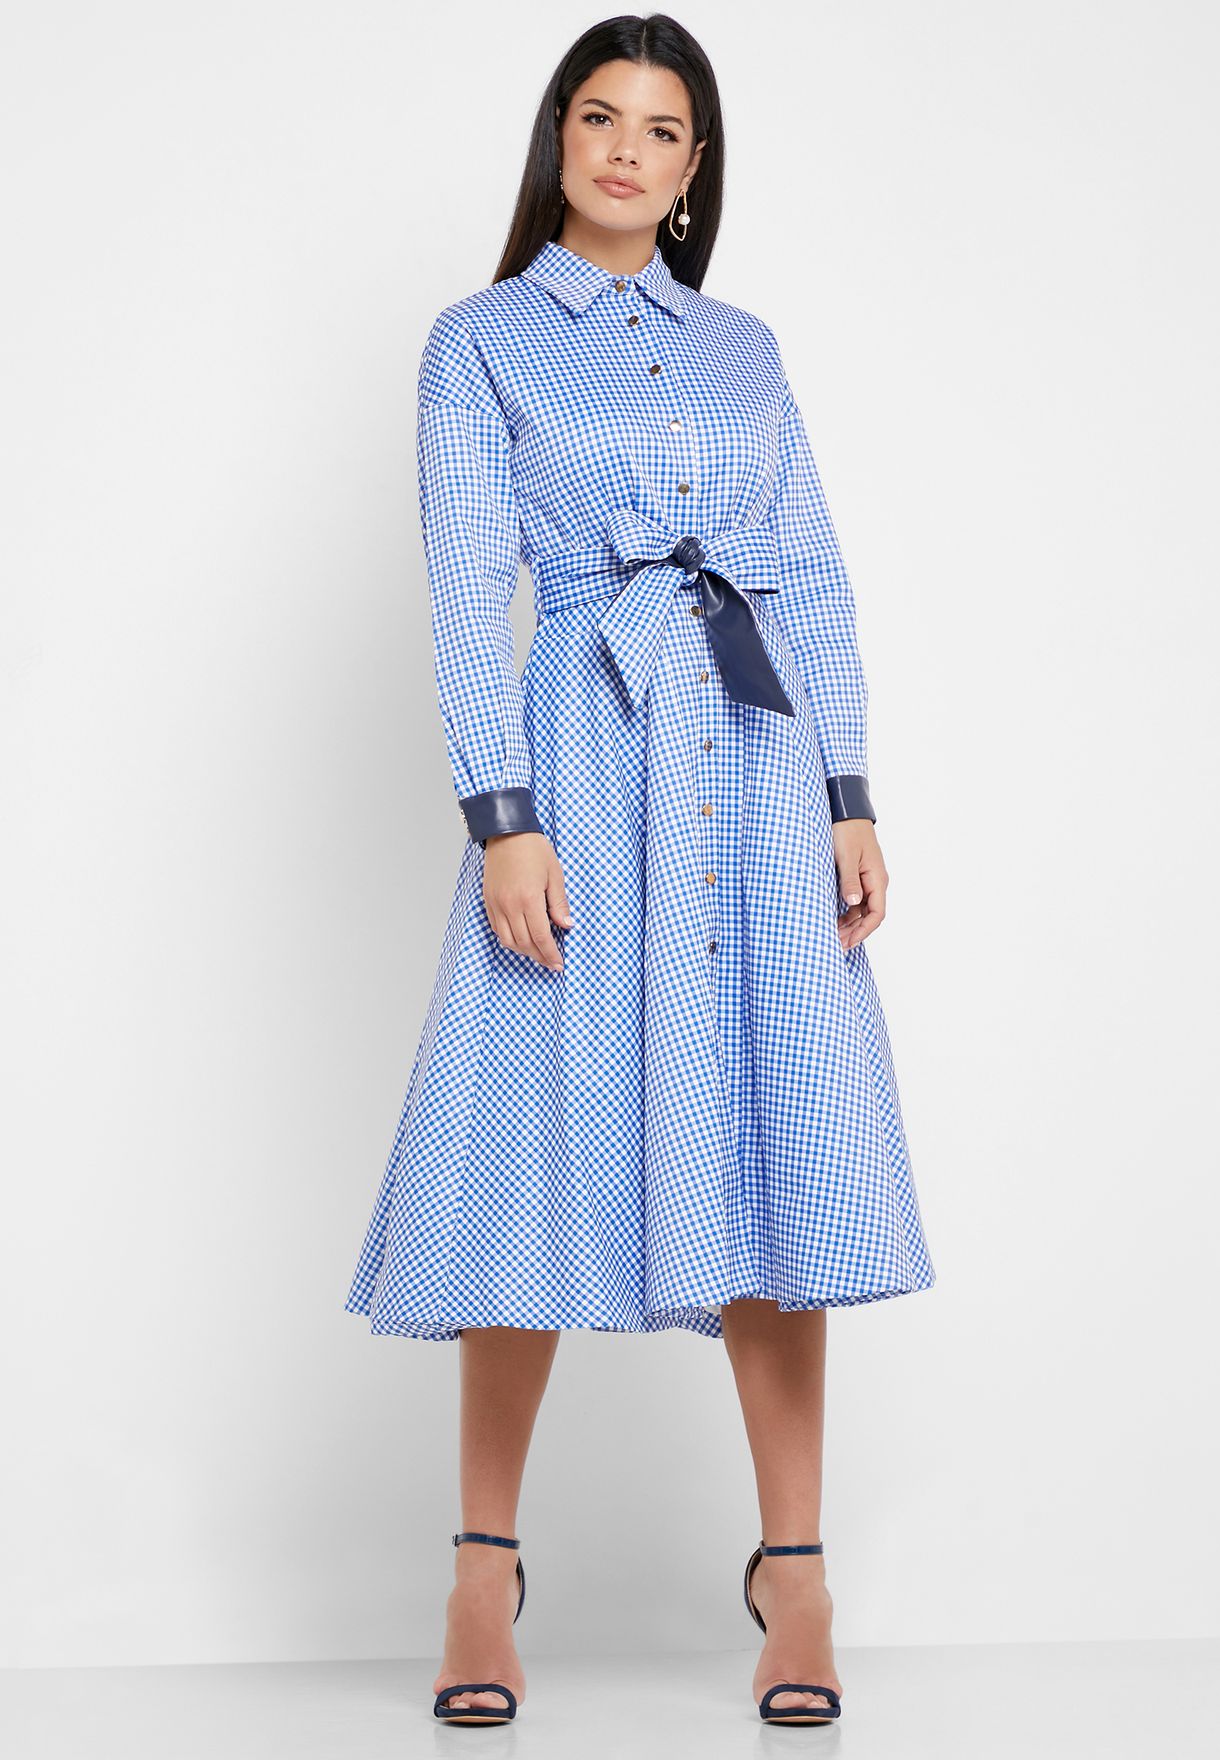 Buy Own The Looks Prints Gingham Print Belted Dress For Women In Dubai Abu Dhabi 954a